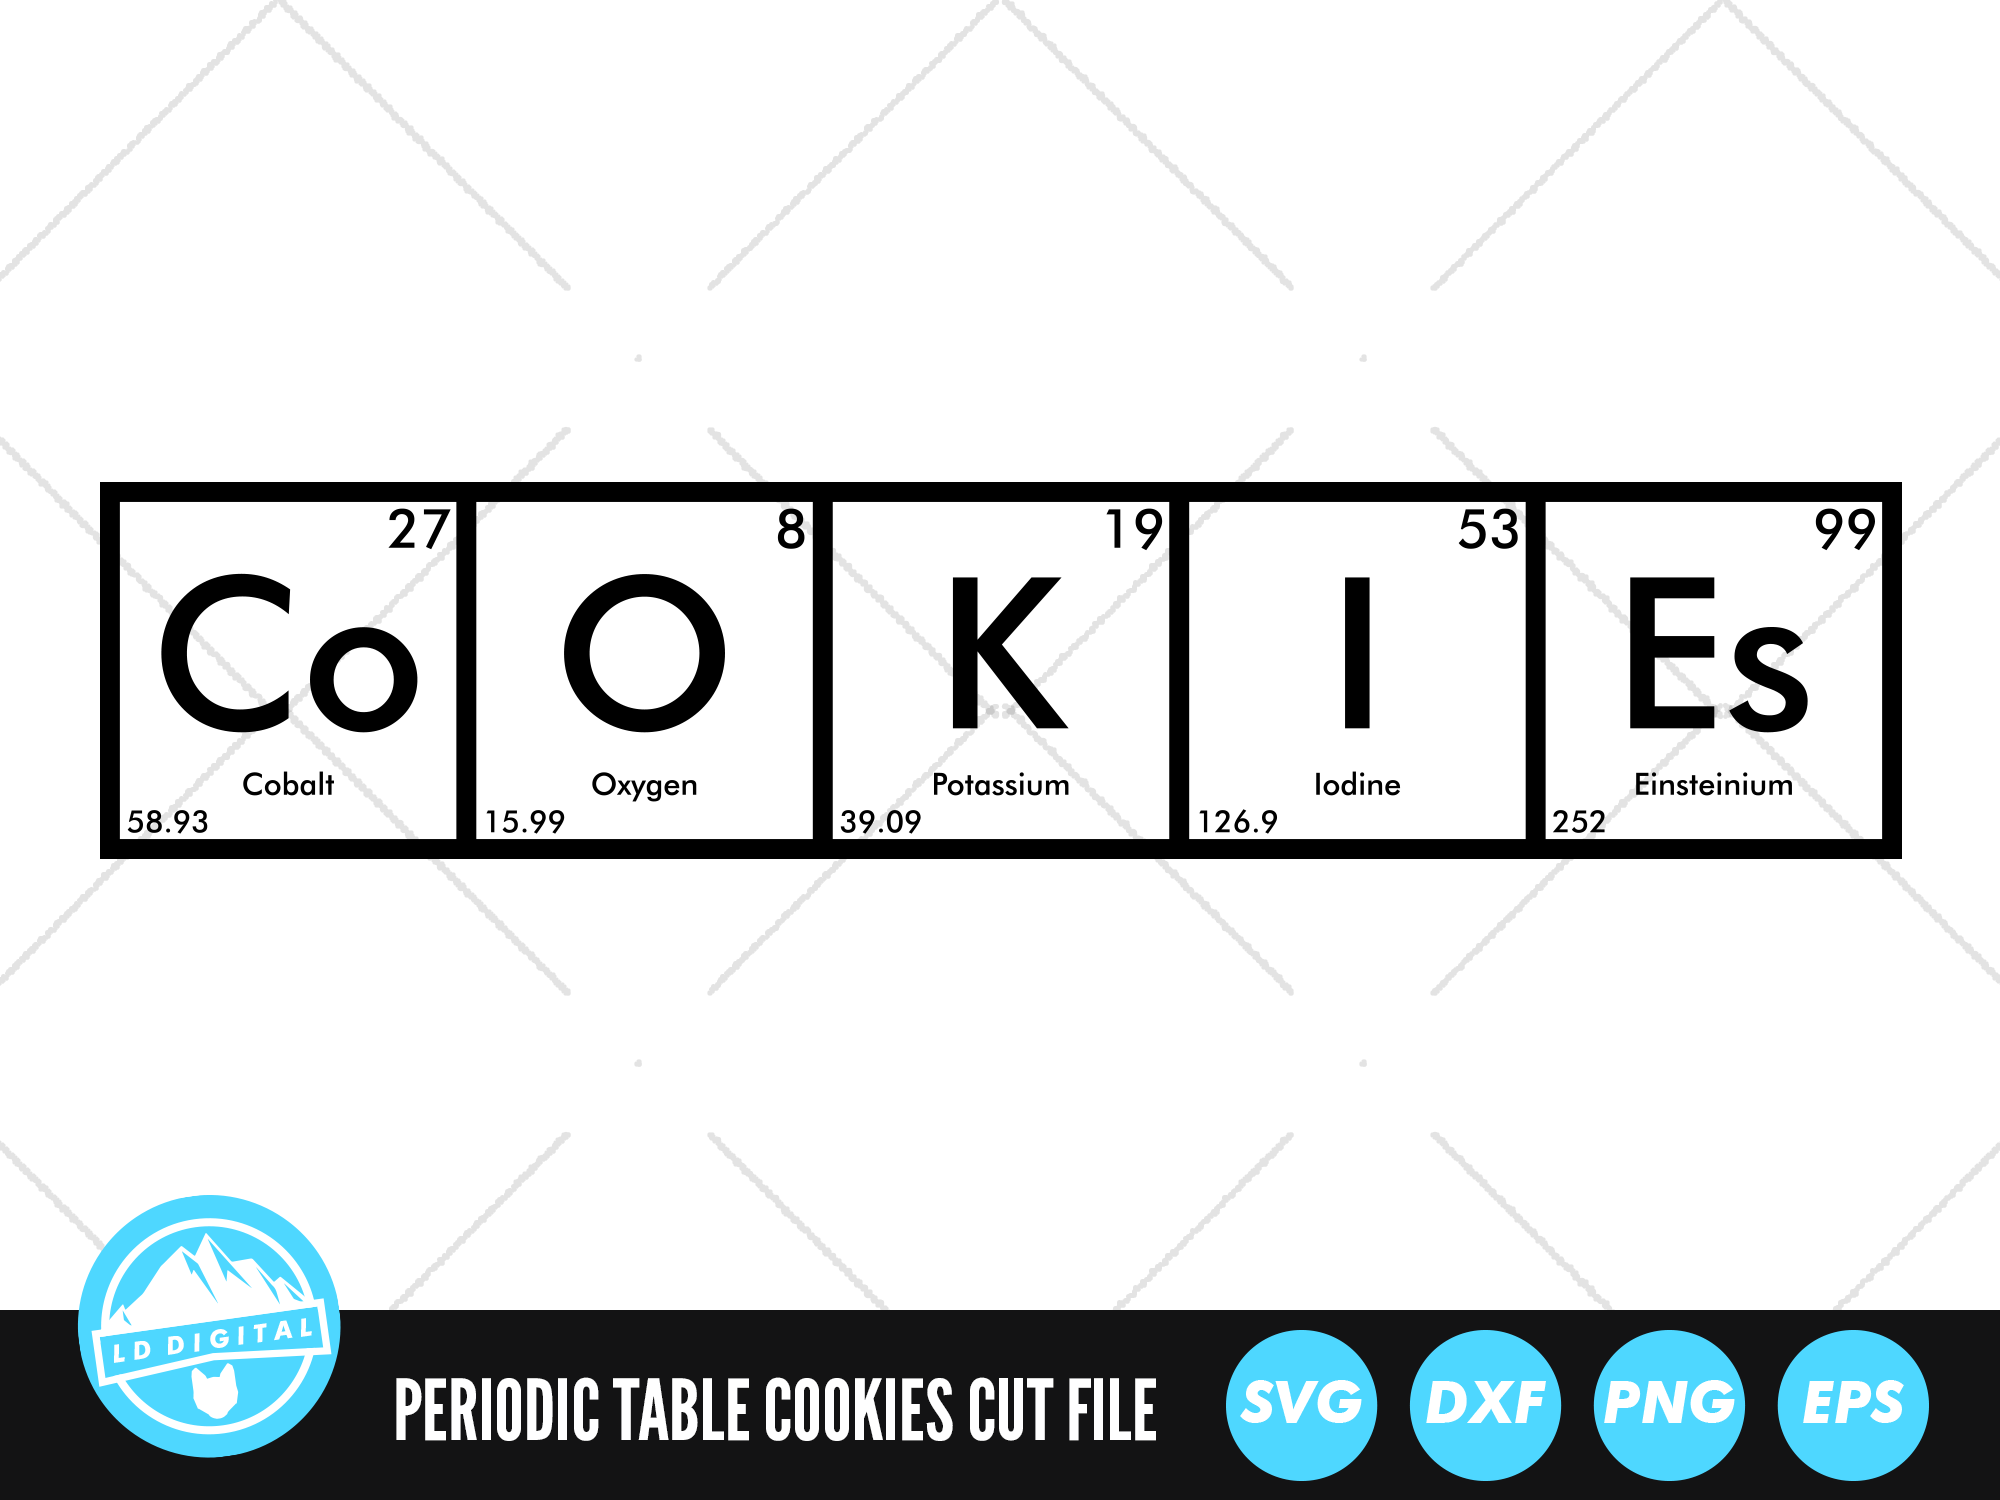 cookies-periodic-table-svg-periodic-table-words-cut-file-cookies-by